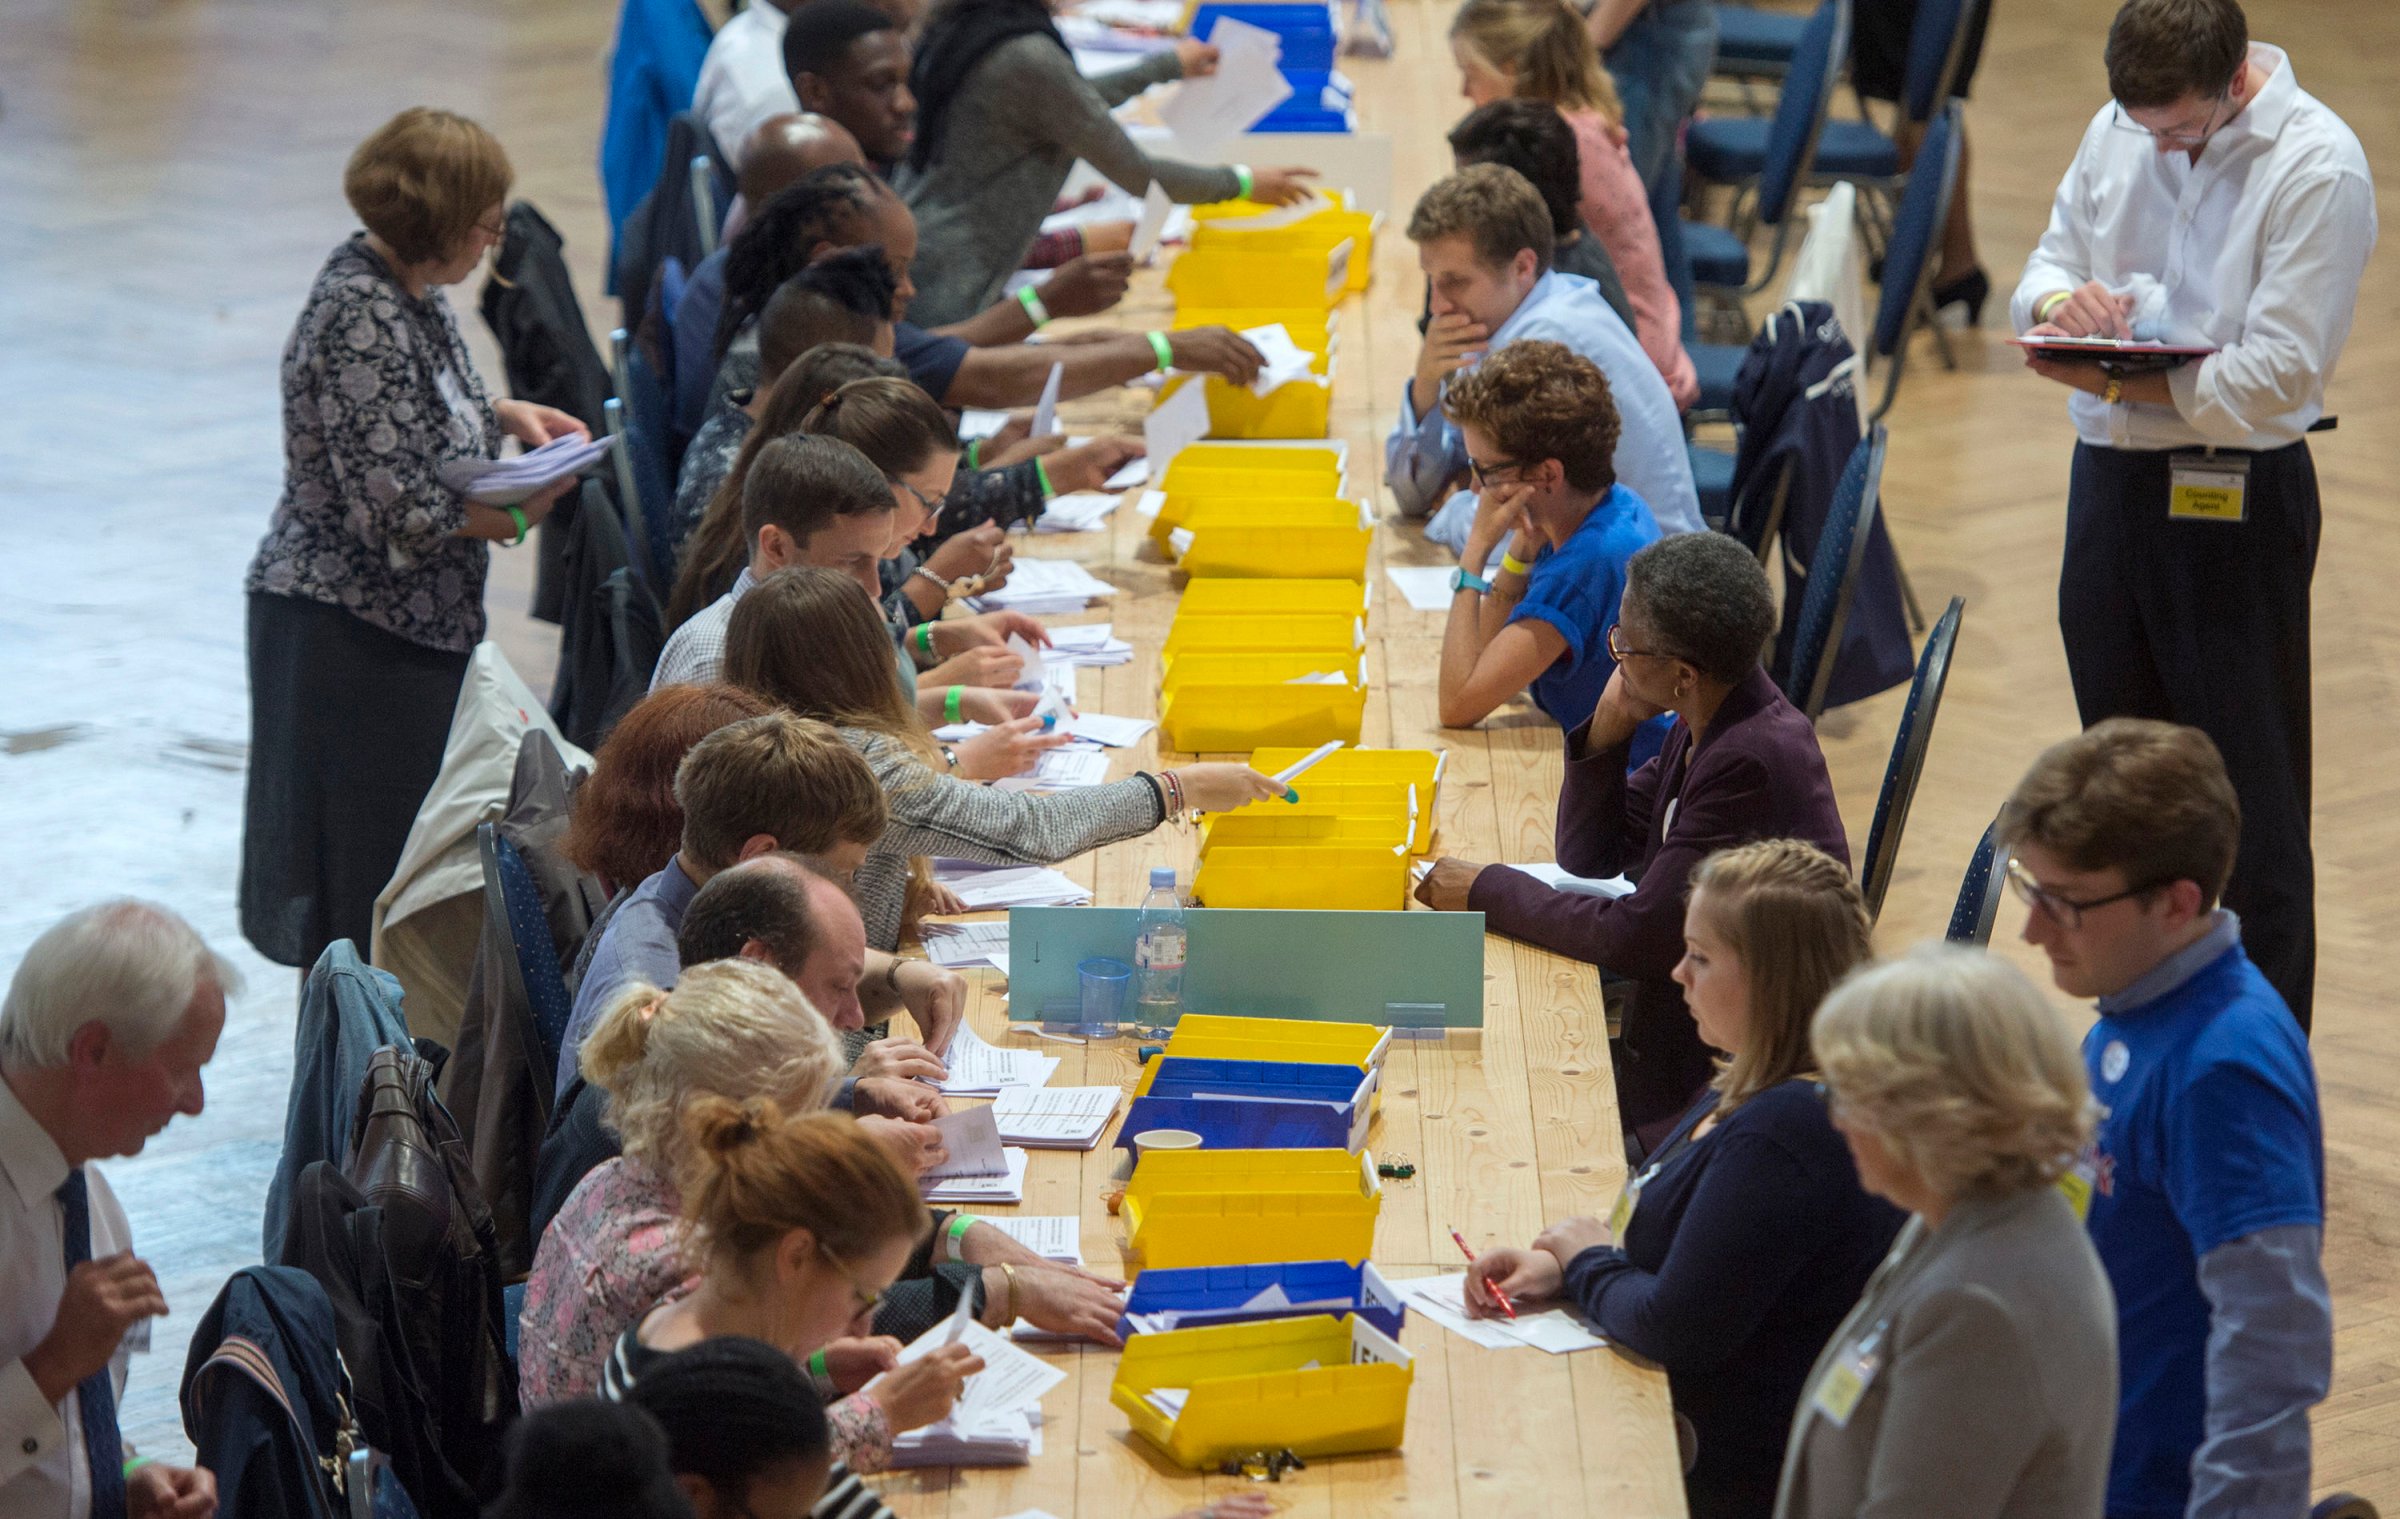 Votes are sorted into Remain, Leave and Doubtful trays as ballots are counted during the E.U. Referendum count for Westminster and the City of London at the Lindley Hall, Royal Horticultural Halls, London, on June 24, 2016.